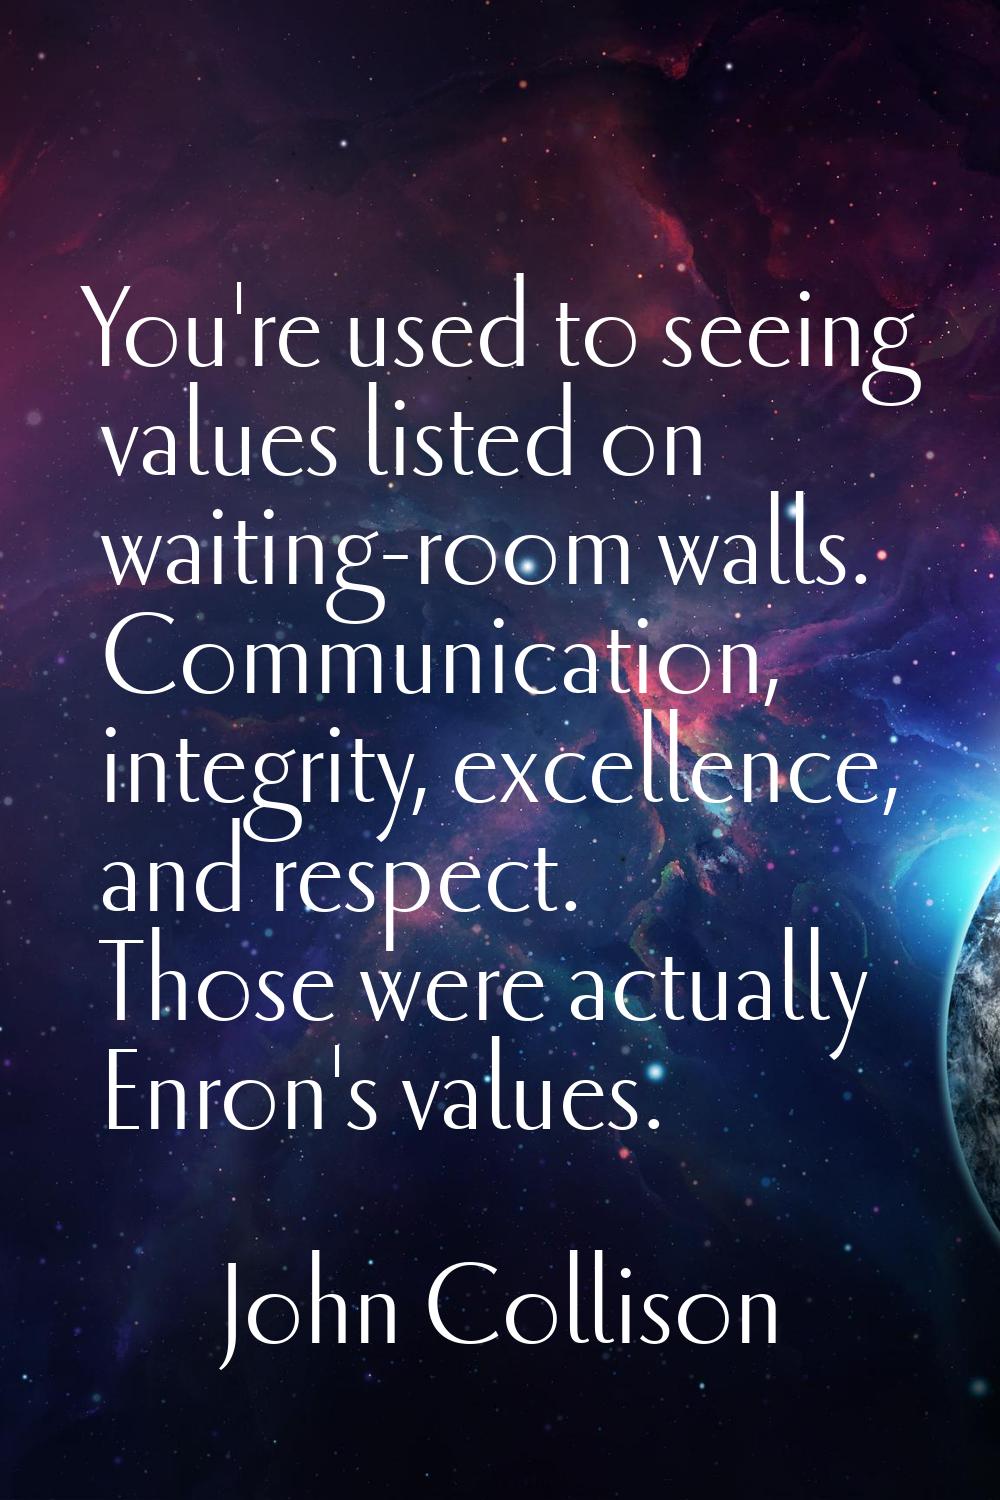 You're used to seeing values listed on waiting-room walls. Communication, integrity, excellence, an